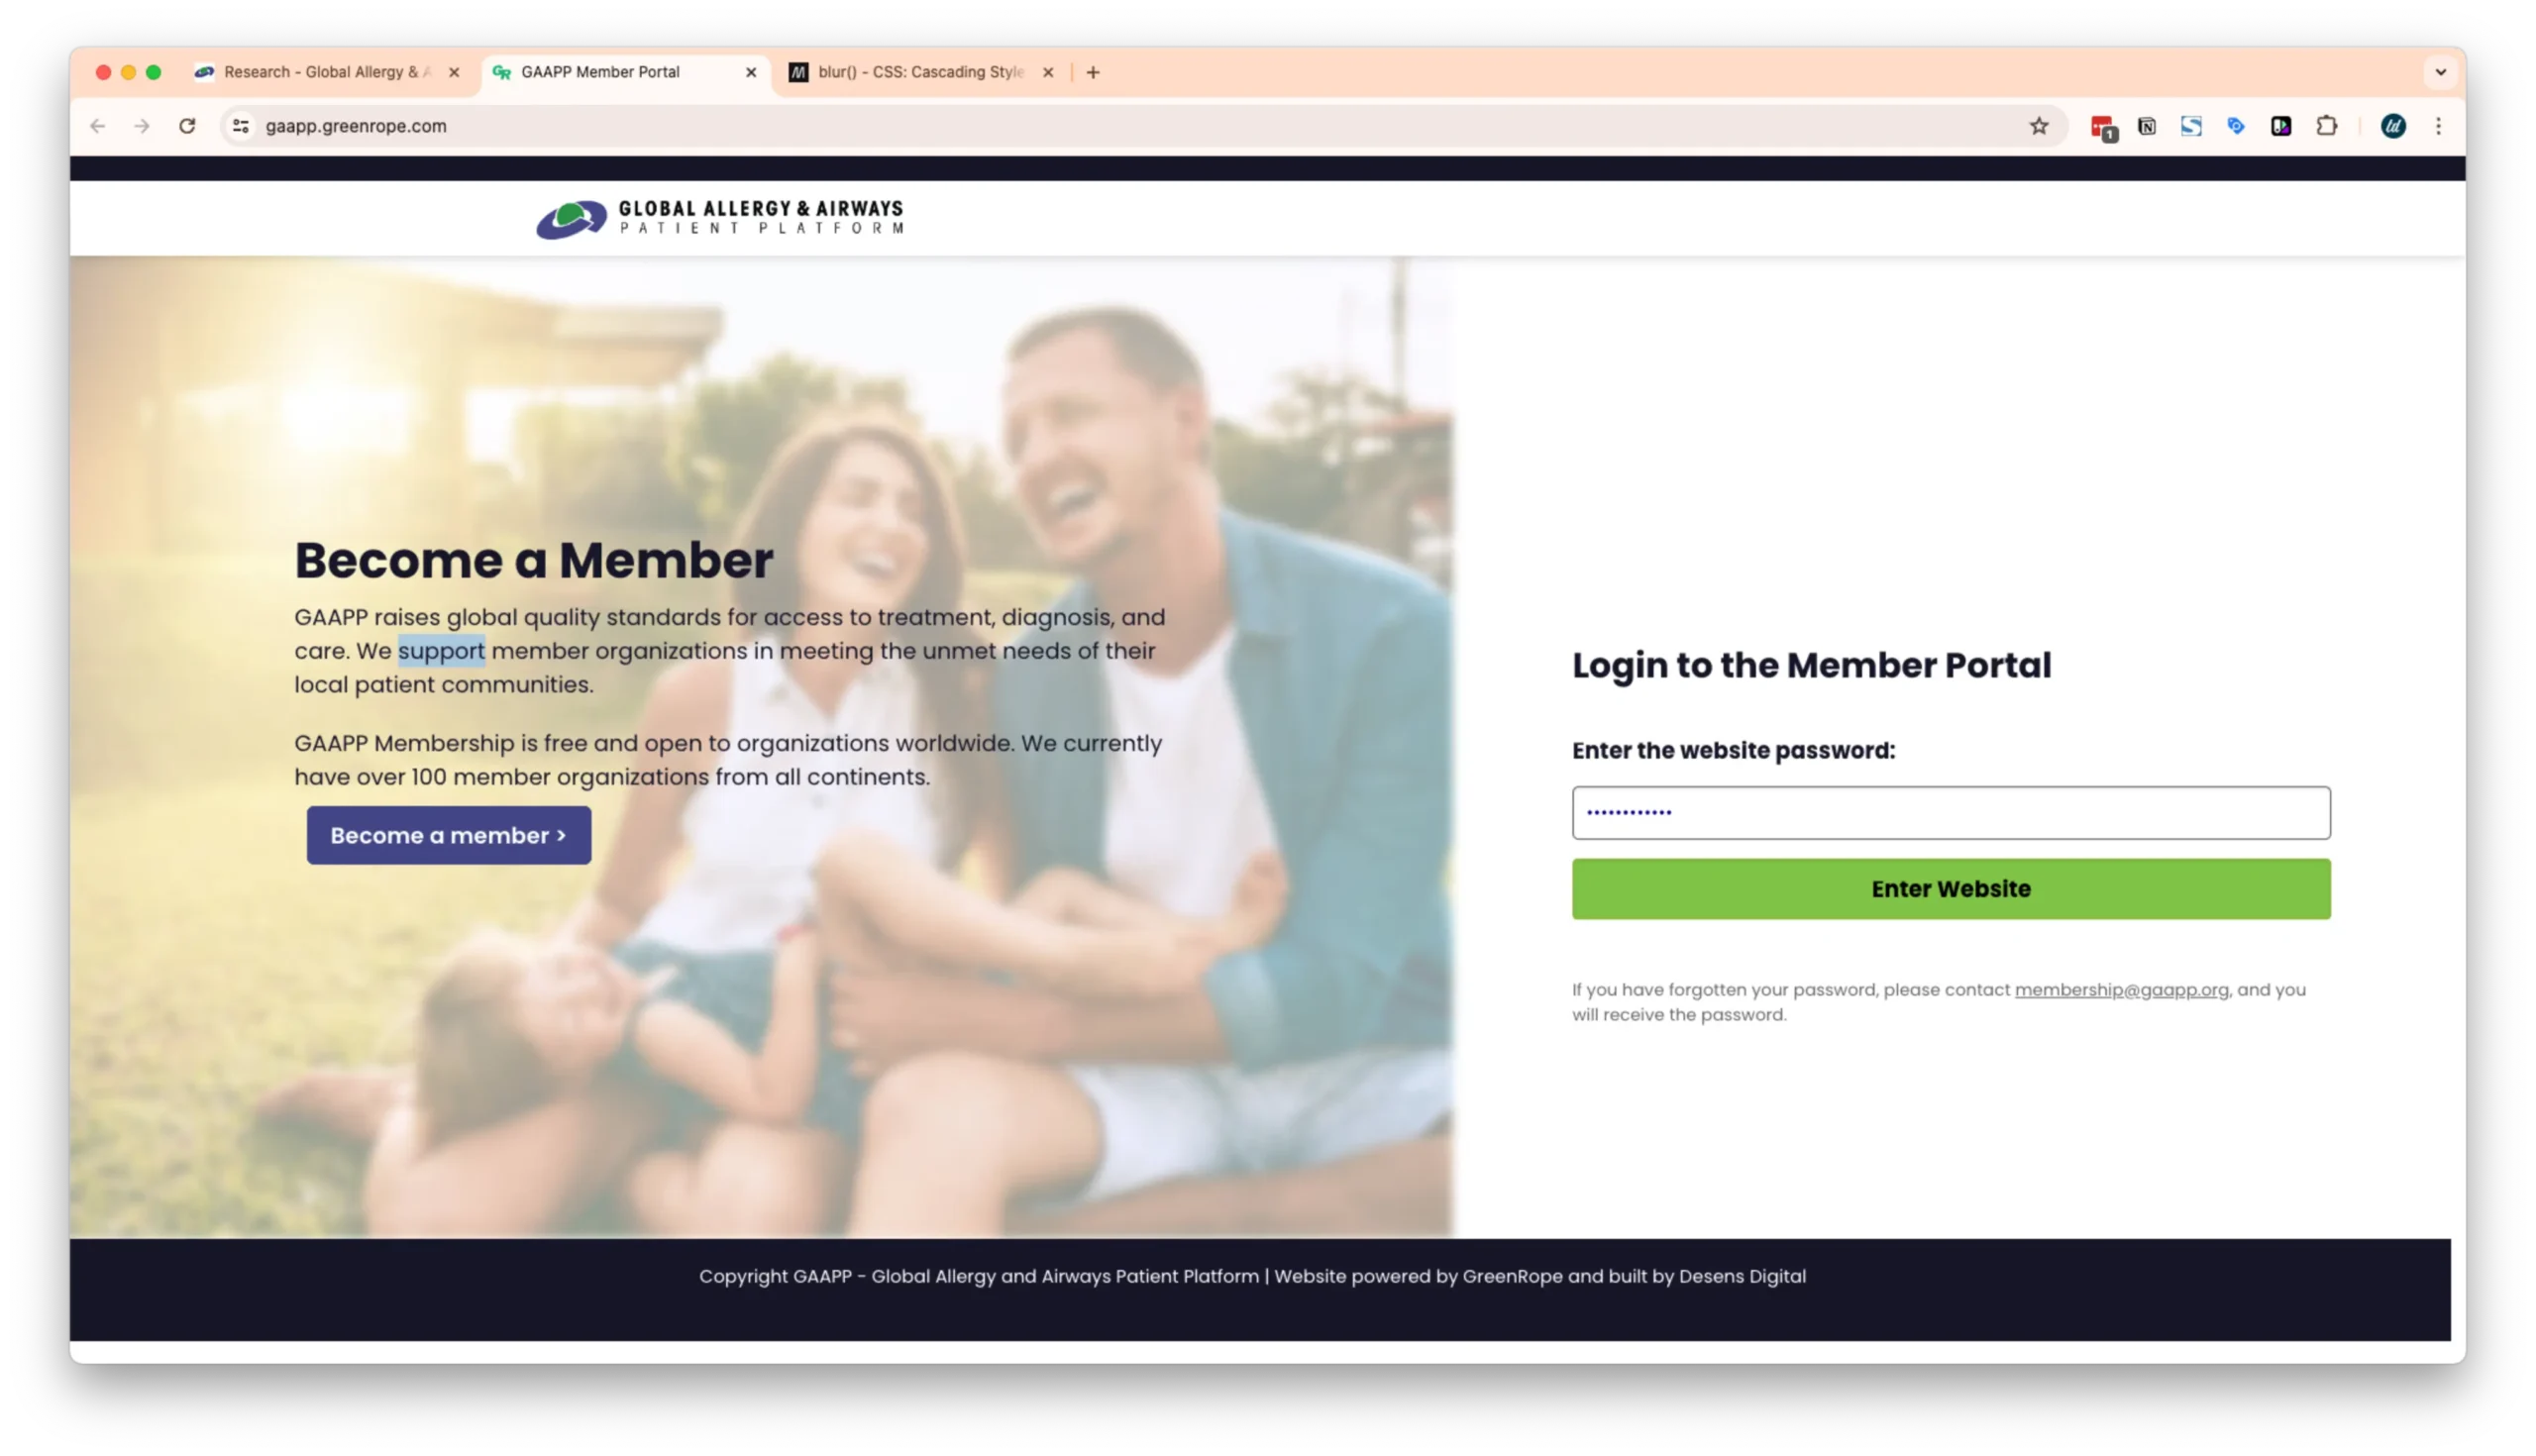 A member portal login page for the Global Allergy & Airways Patient Platform. The left side encourages membership with a blurred image of a happy family in the background, while the right side has a login section.